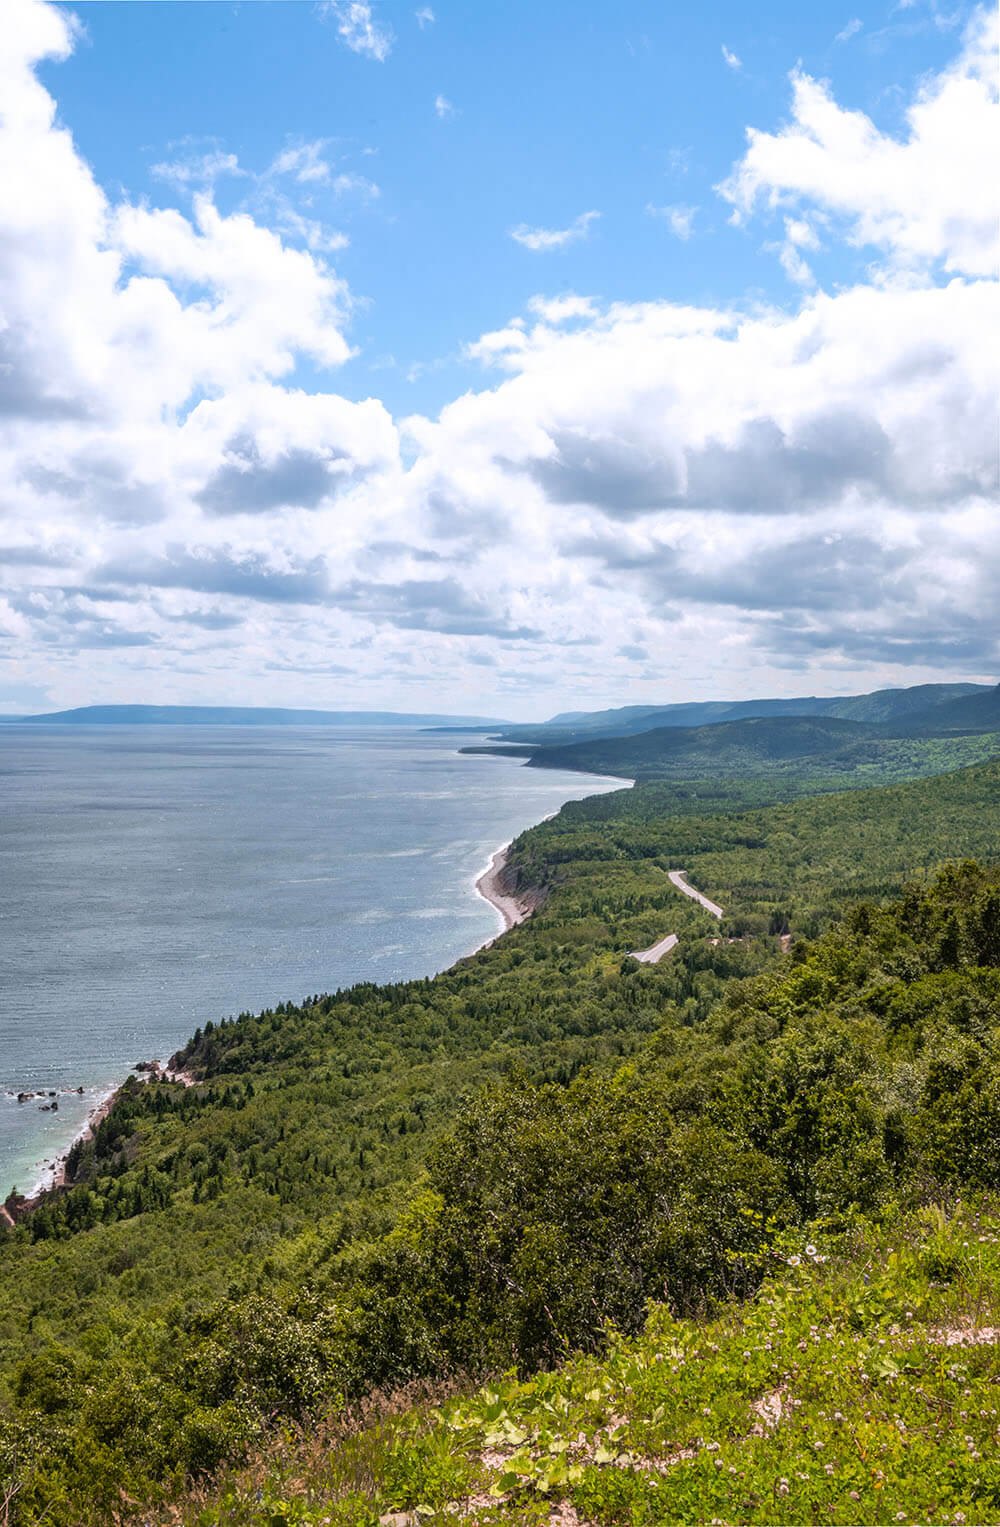 Planning a trip to Cape Breton soon? This guide includes all of the best things to do in Cape Breton Island! From activities and attractions, to the top restaurants, hikes, and all the things you'll want to see along the famous Cabot Trial. You won't want to miss this guide that will help you plan the perfect getaway to Cape Breton. Click for the full list. Pictured here: Drive along the famous Cabot Trail